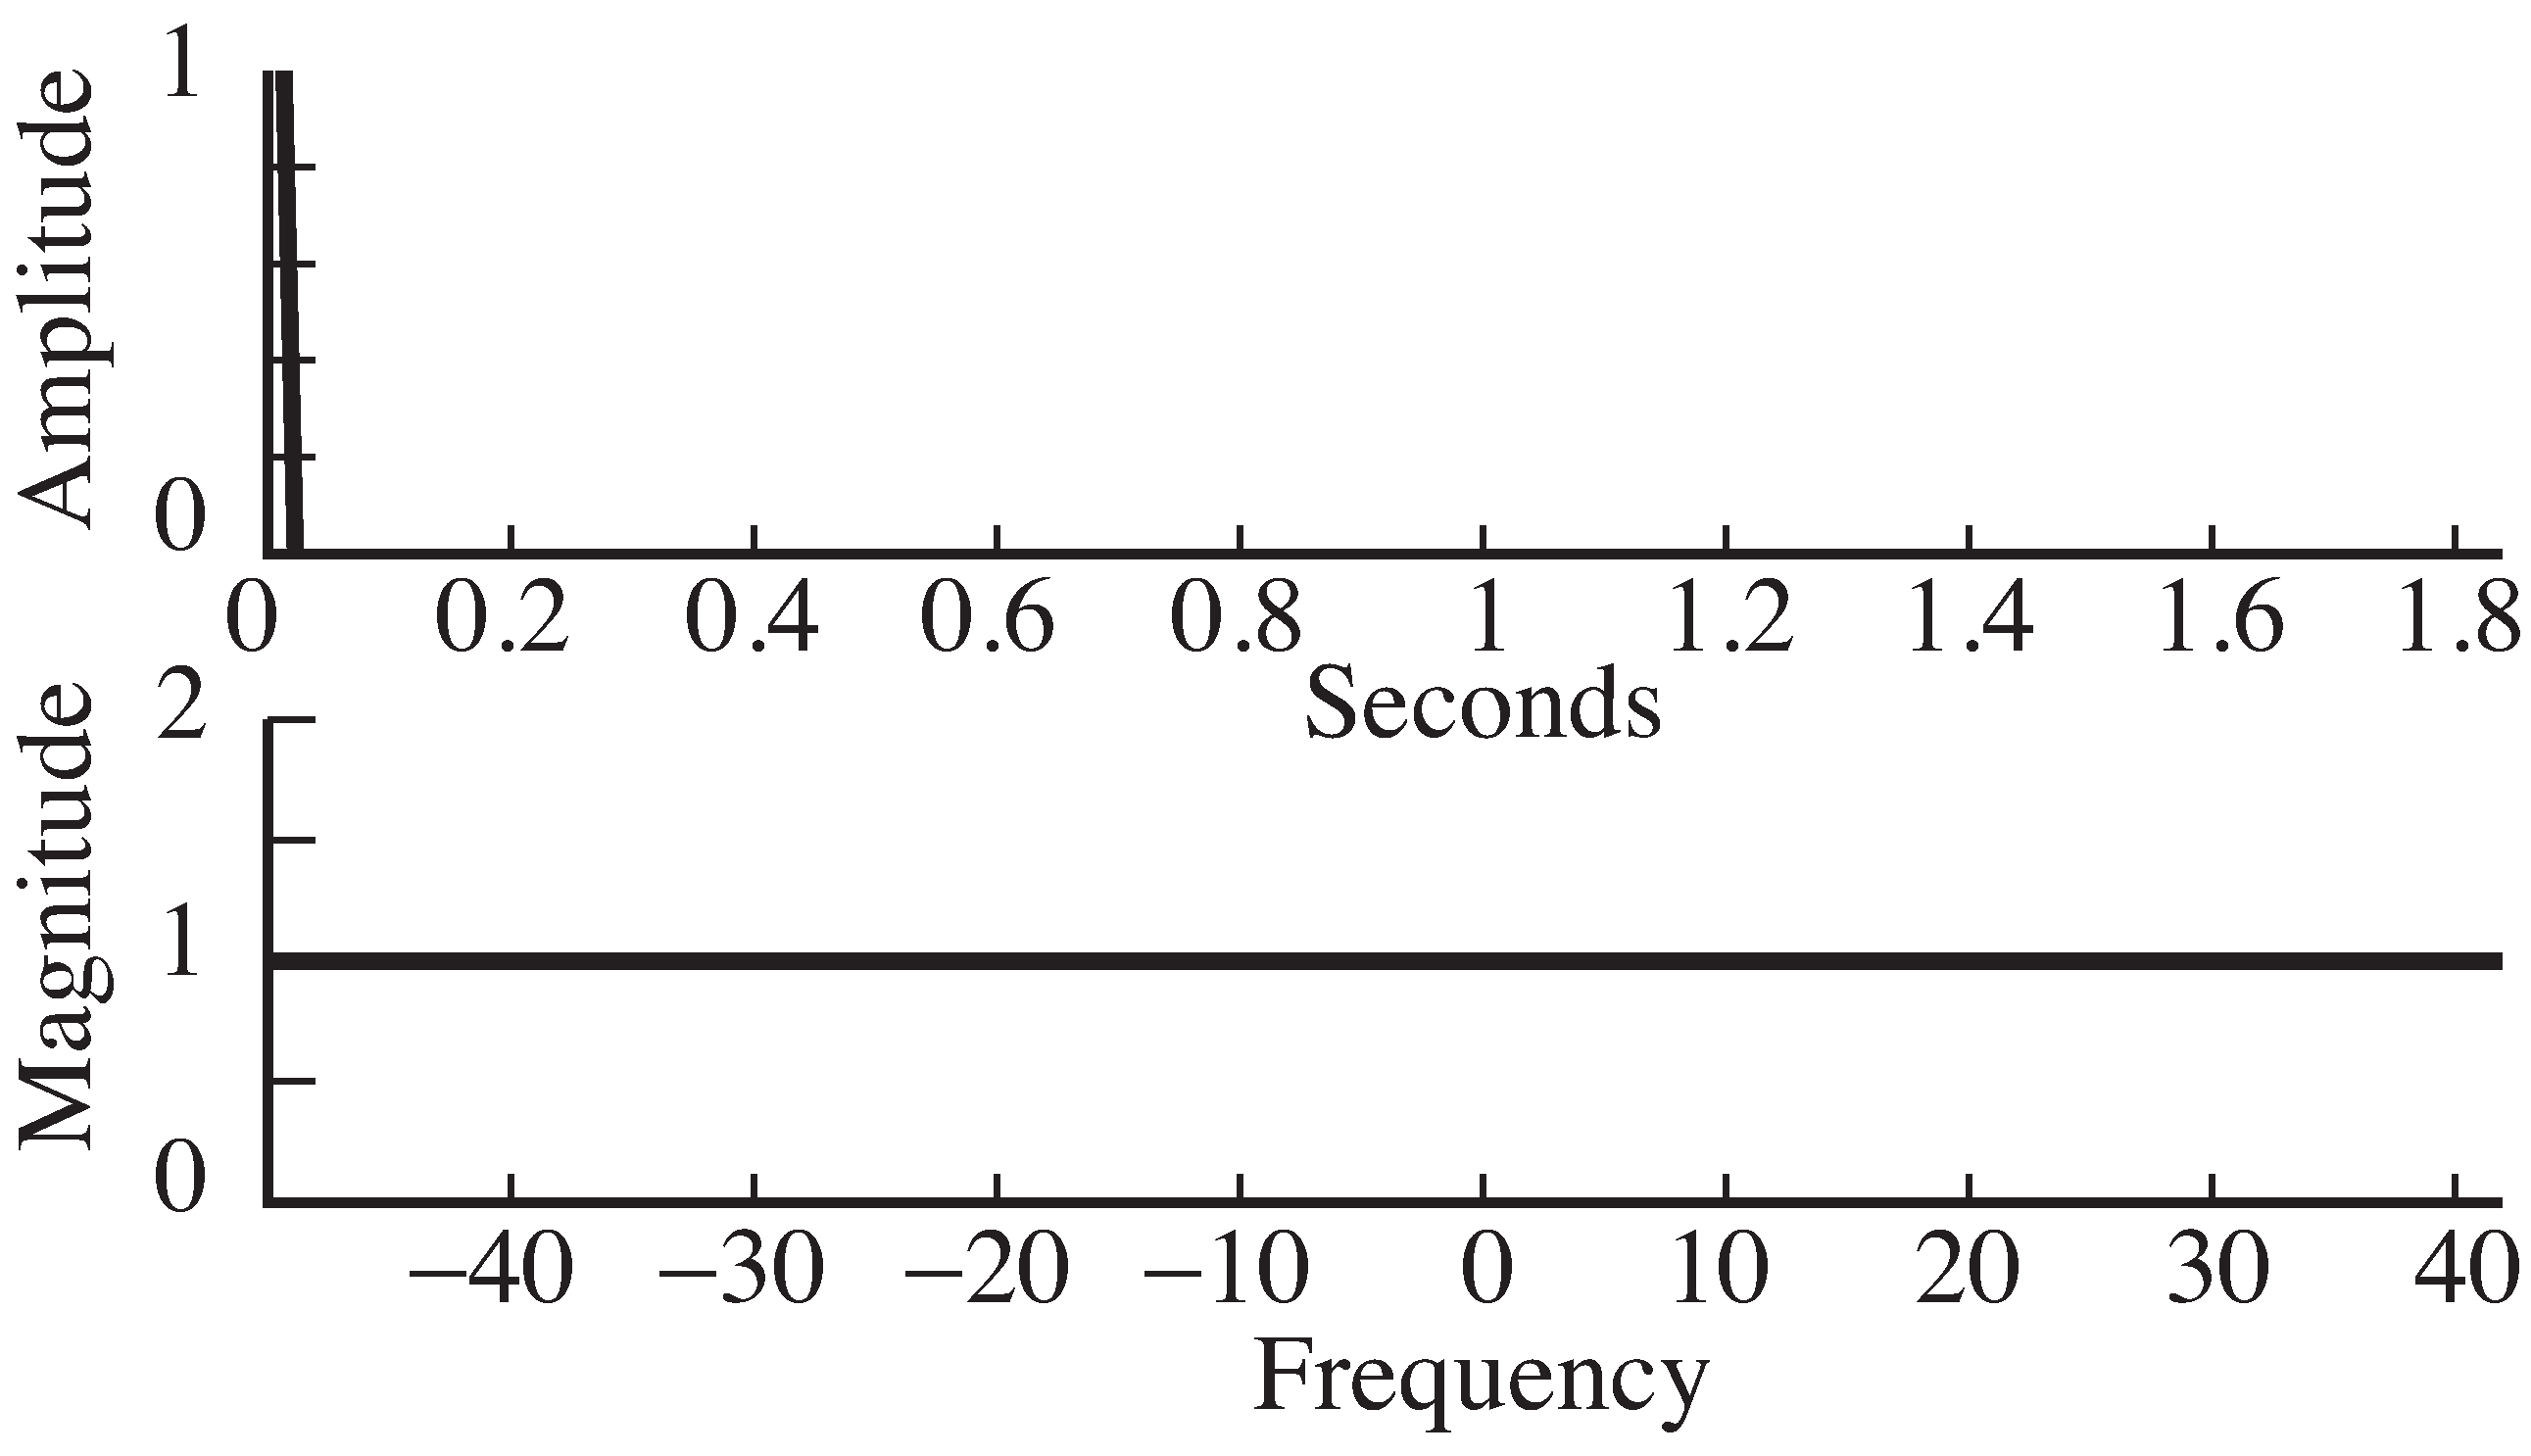 A (discrete) delta function at time 0 has a magnitude spectrum equal to 1 for all frequencies.